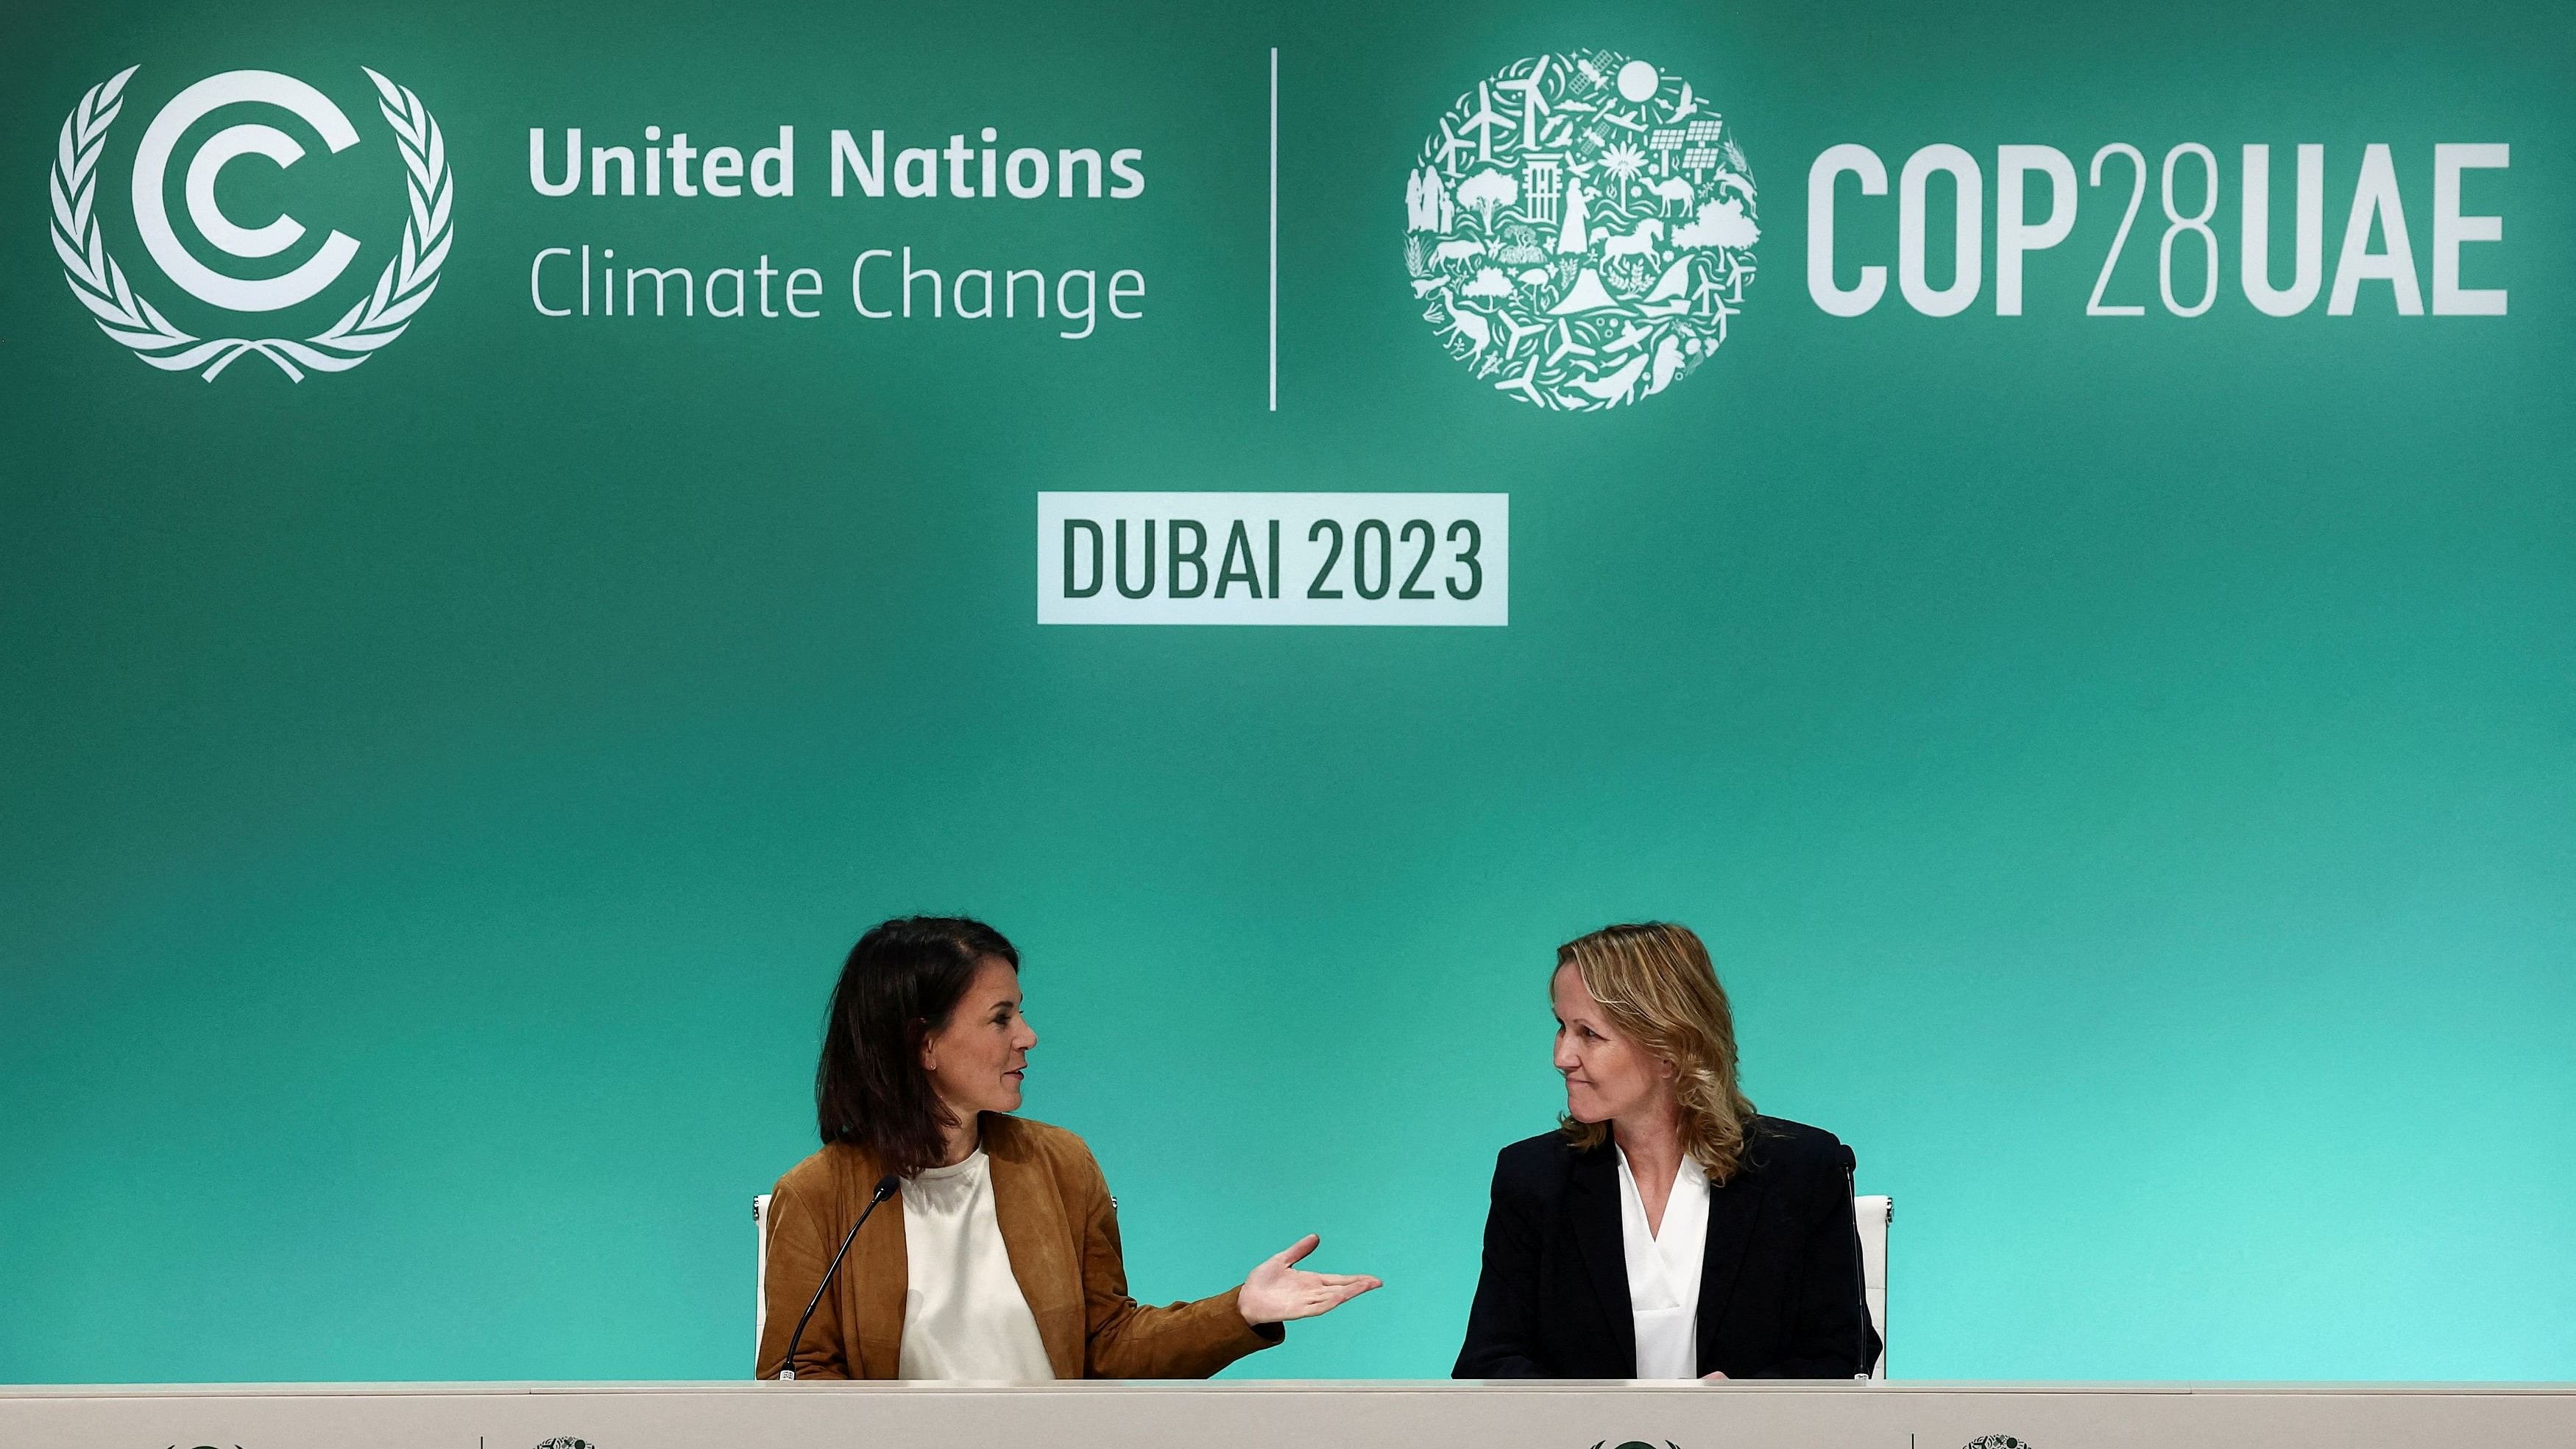 <div class="paragraphs"><p>Germany's Foreign Minister Annalena Baerbock and Environment Minister Steffi Lemke attend a press conference, on the sidelines of the United Nations Climate Change Conference COP28, in Dubai, United Arab Emirates.</p></div>